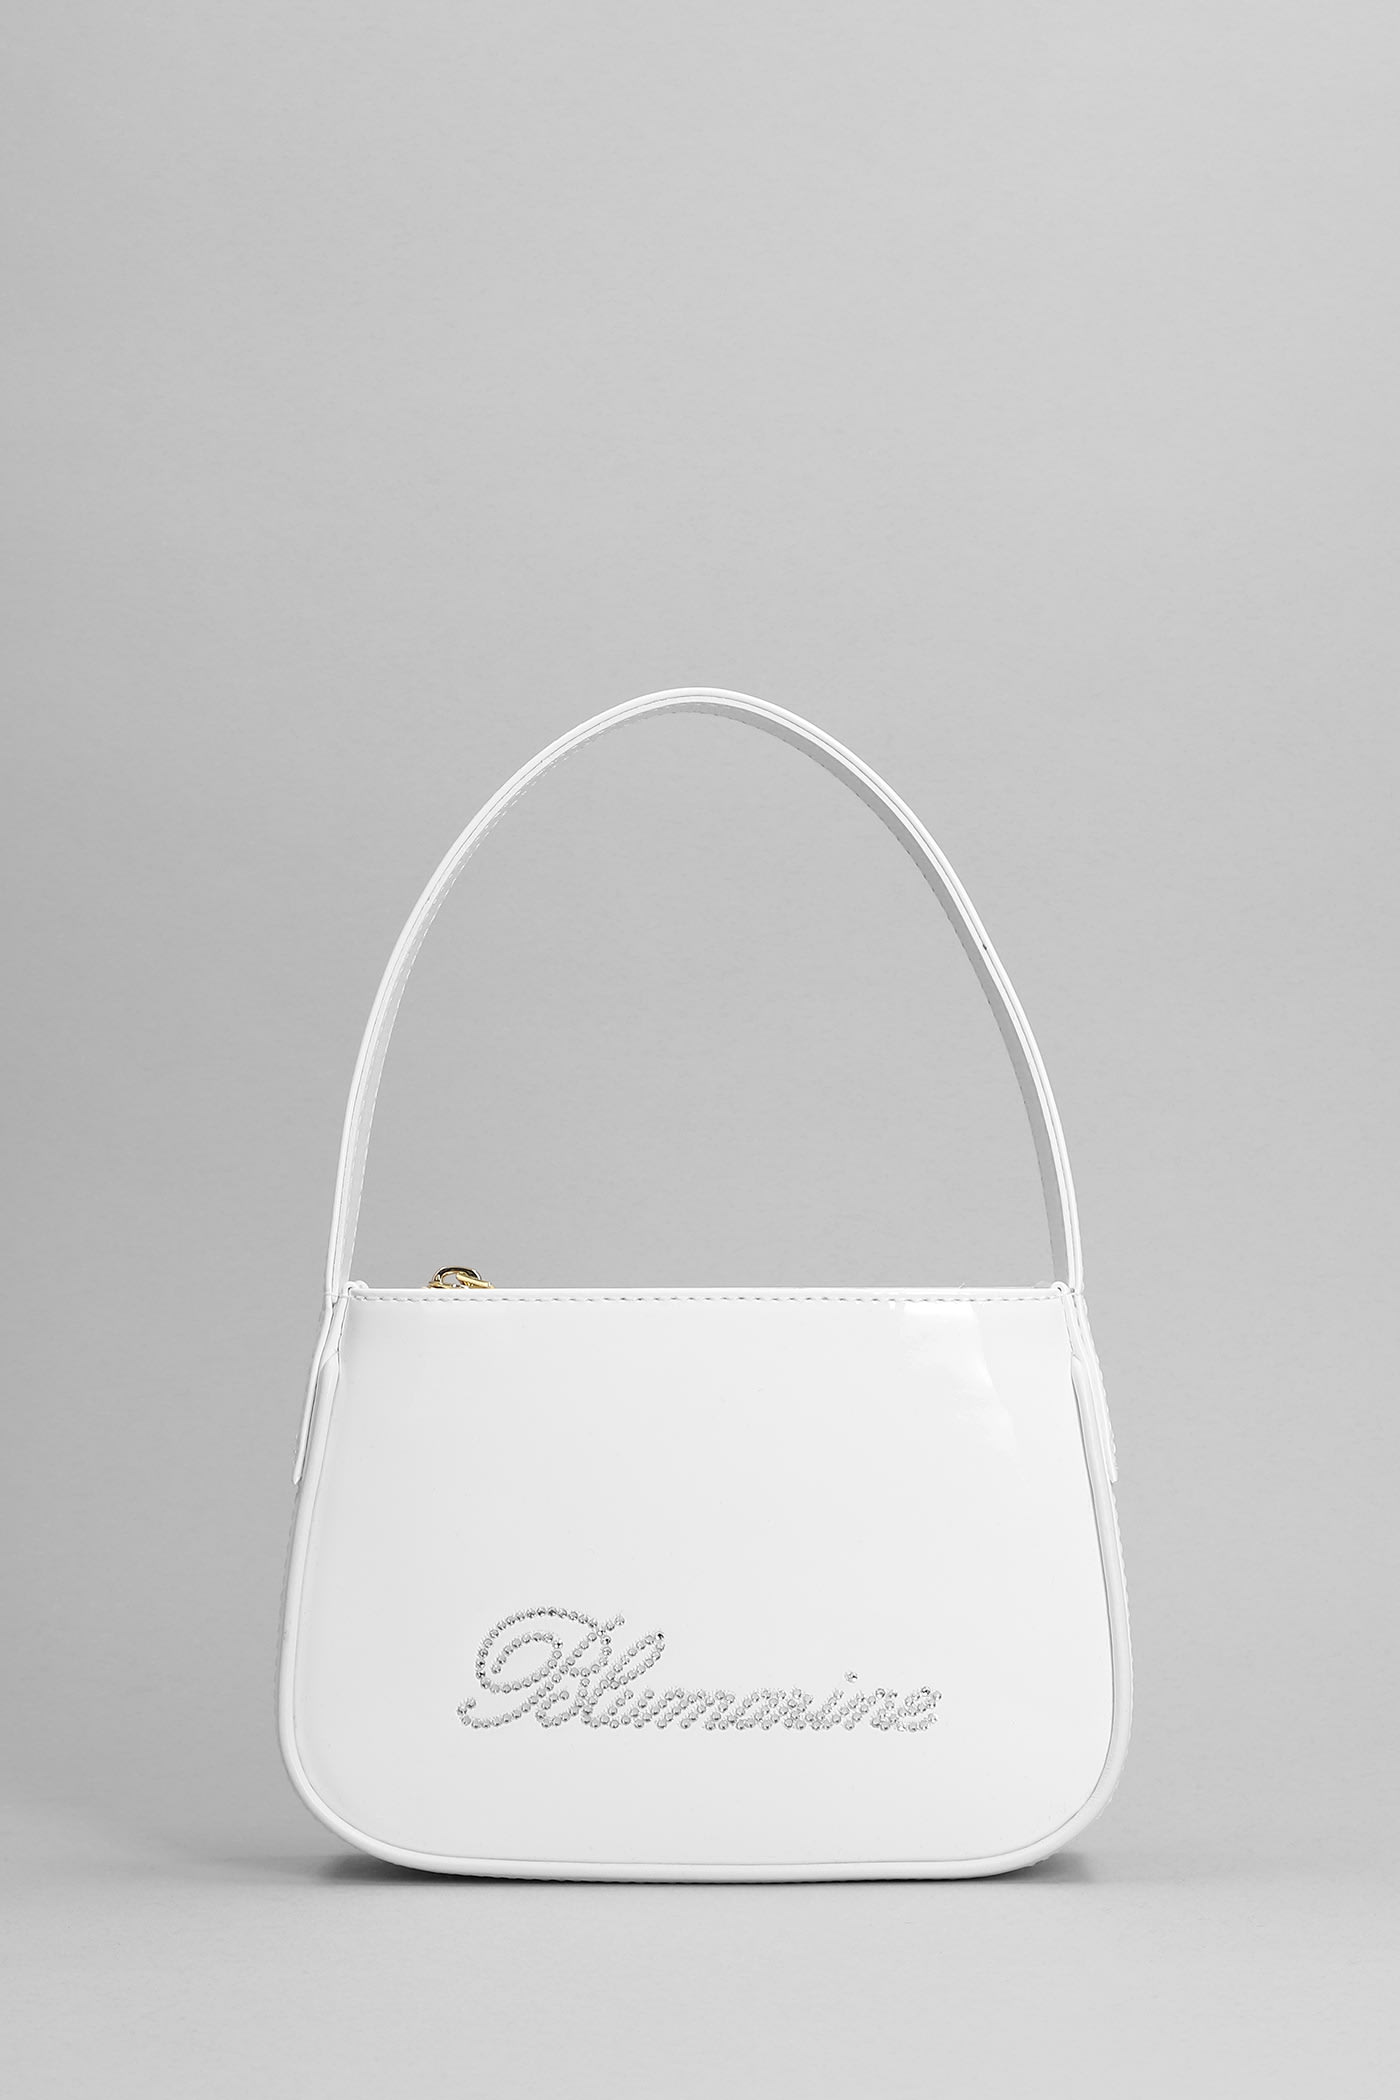 Blumarine Hand Bag In White Patent Leather